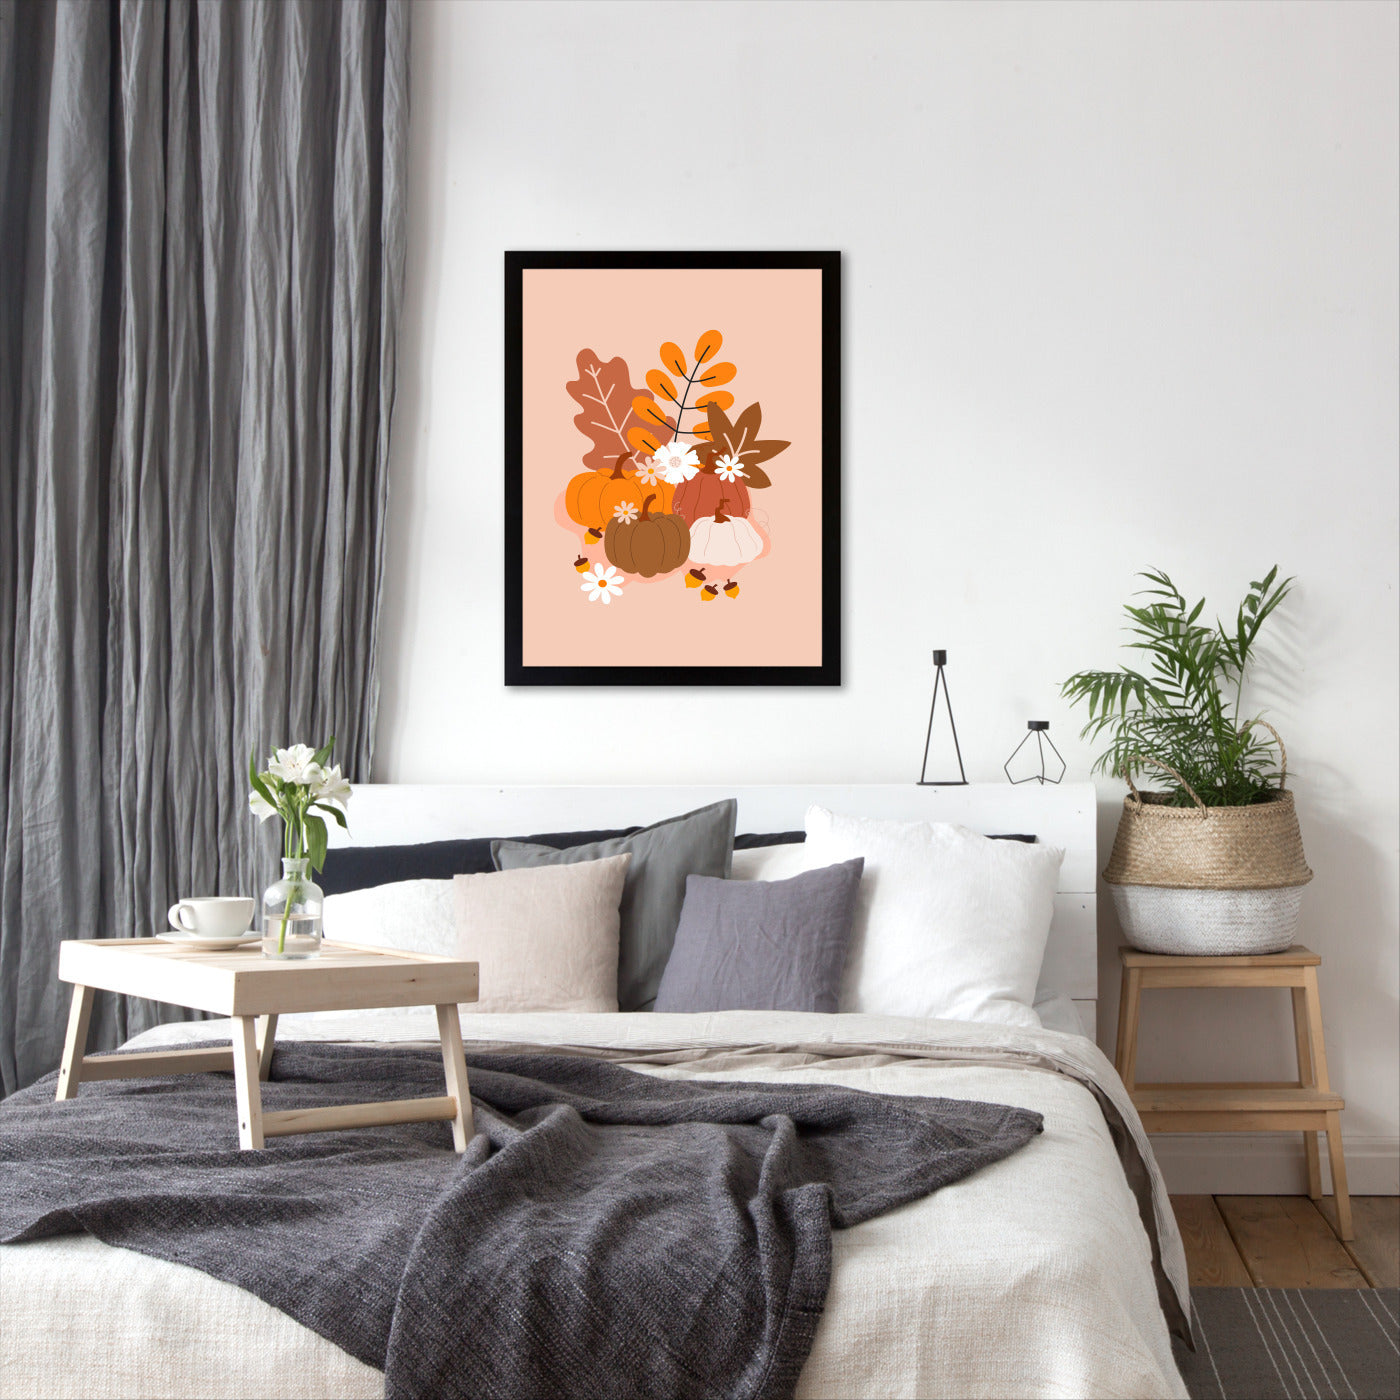 Autumn Thankful by Artprink - Canvas, Poster or Framed Print